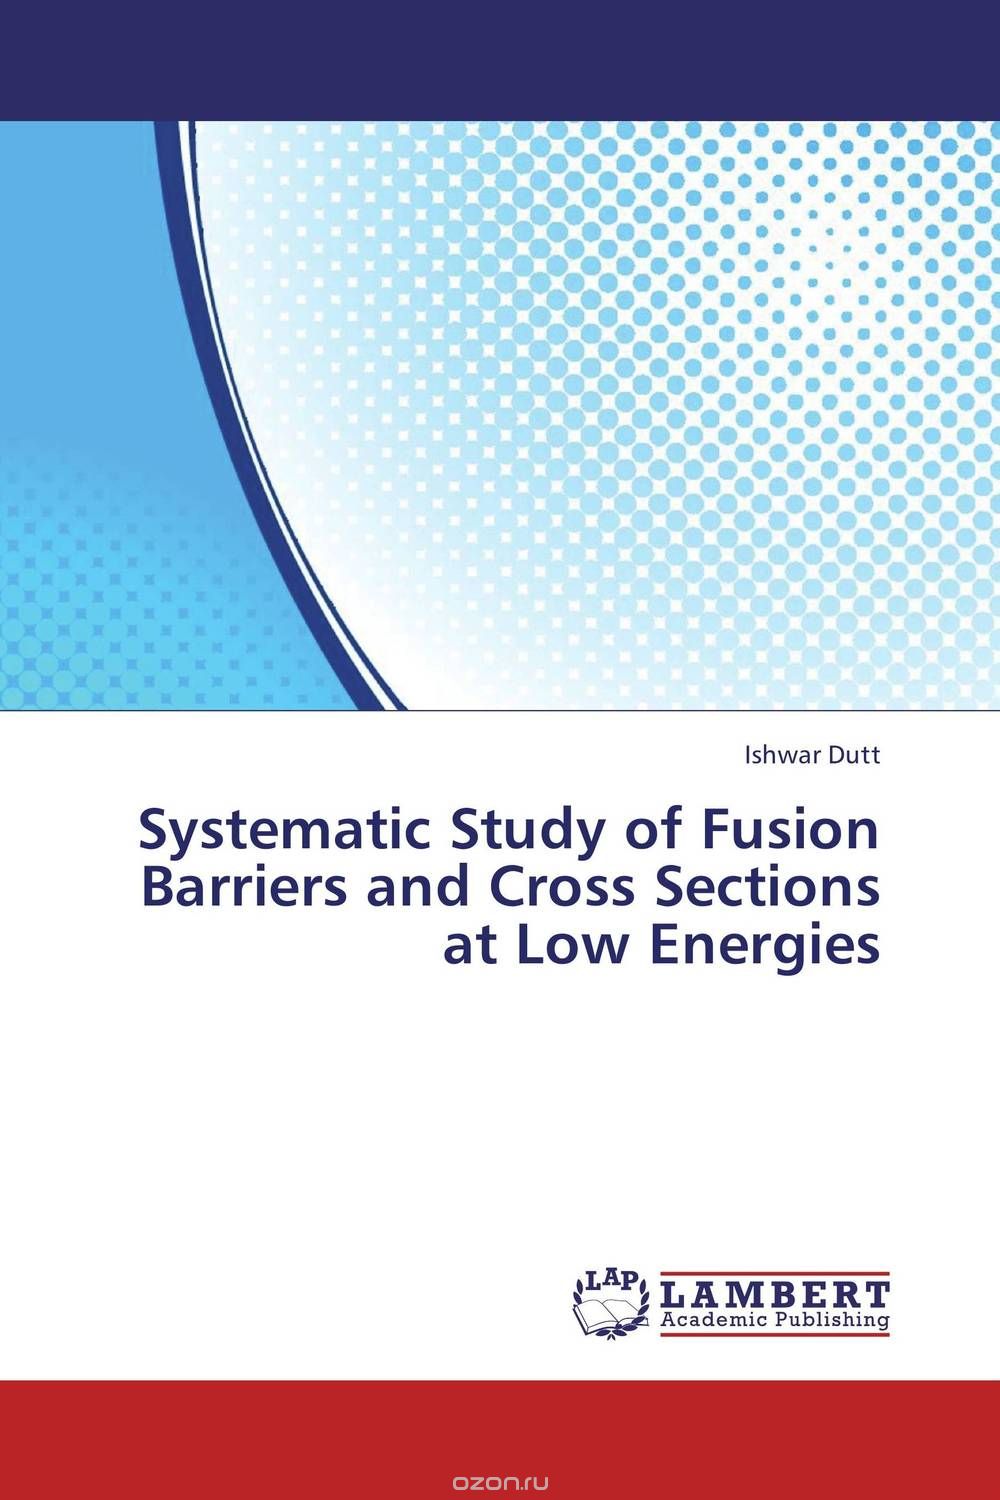 Скачать книгу "Systematic Study of Fusion Barriers and Cross Sections at Low Energies"